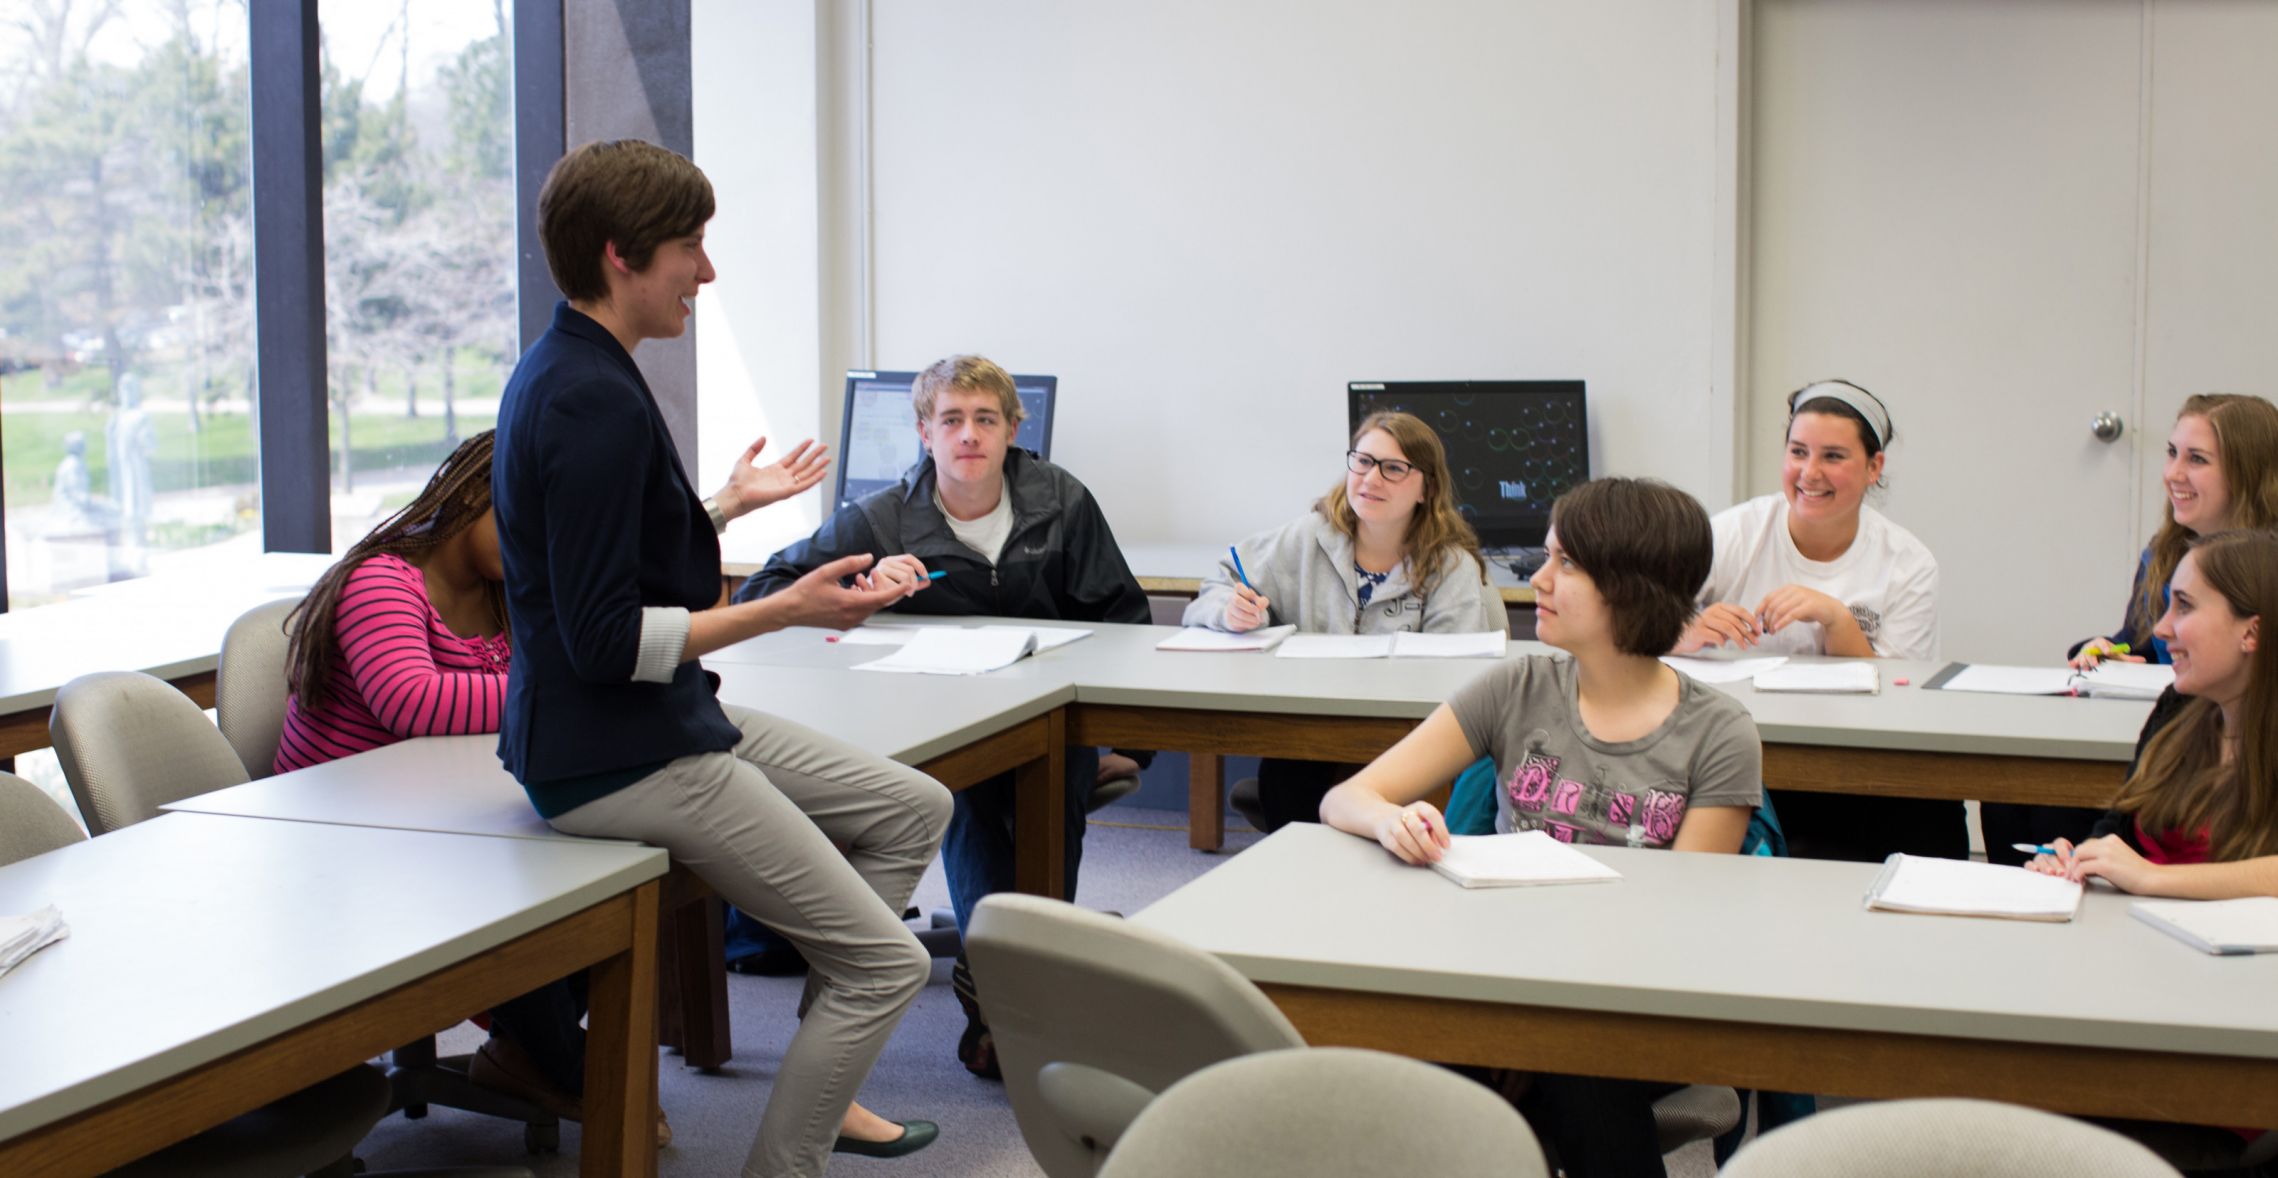 Prof. Haley Yaple helps students pursuing a mathematics major in a math class.